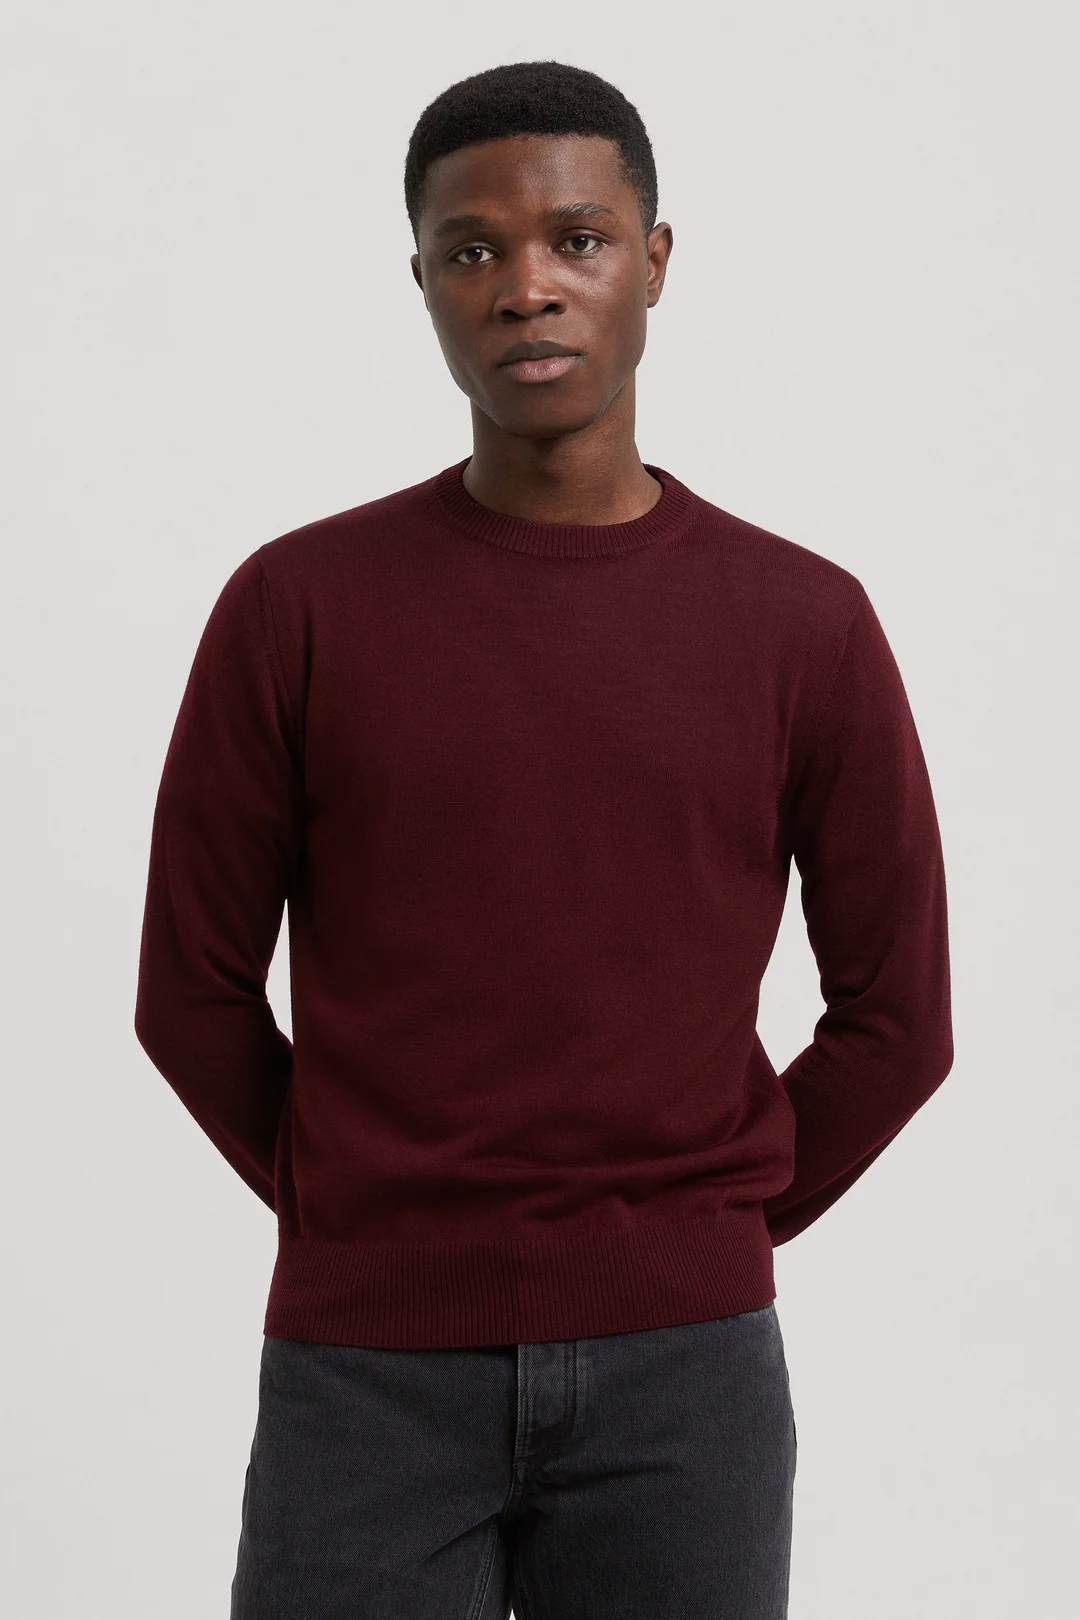 Men's Knitwear  Extra Fine Merino and Cashmere Sweaters - ASKET